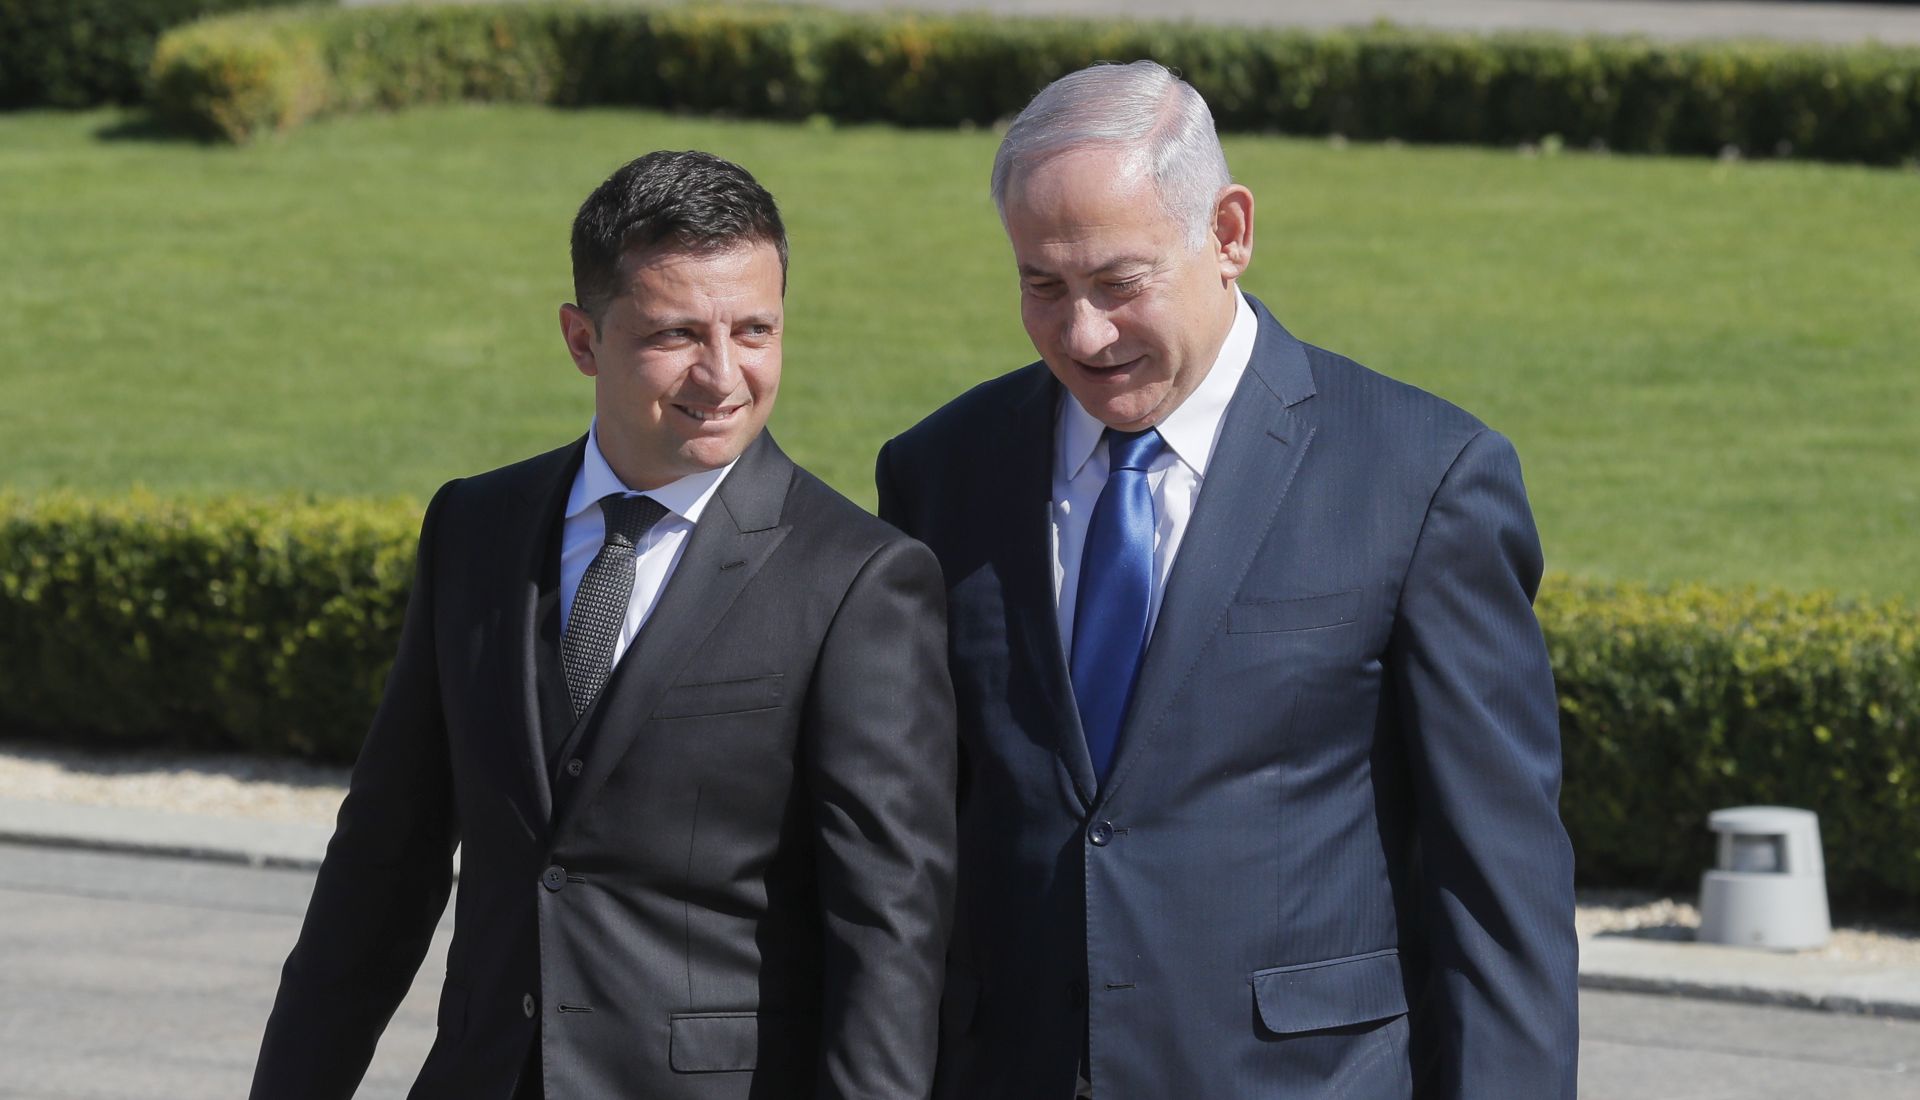 epa07780234 Ukrainian President Volodymyr Zelensky (L) and Israeli Prime Minister Benjamin Netanyahu (R) attend their meeting at the Mariinskiy Palace in Kiev, Ukraine, 19 August 2019. Benjamin Netanyahu is on a two-day official visit to Kiev to meet with top Ukrainian officials.  EPA/SERGEY DOLZHENKO